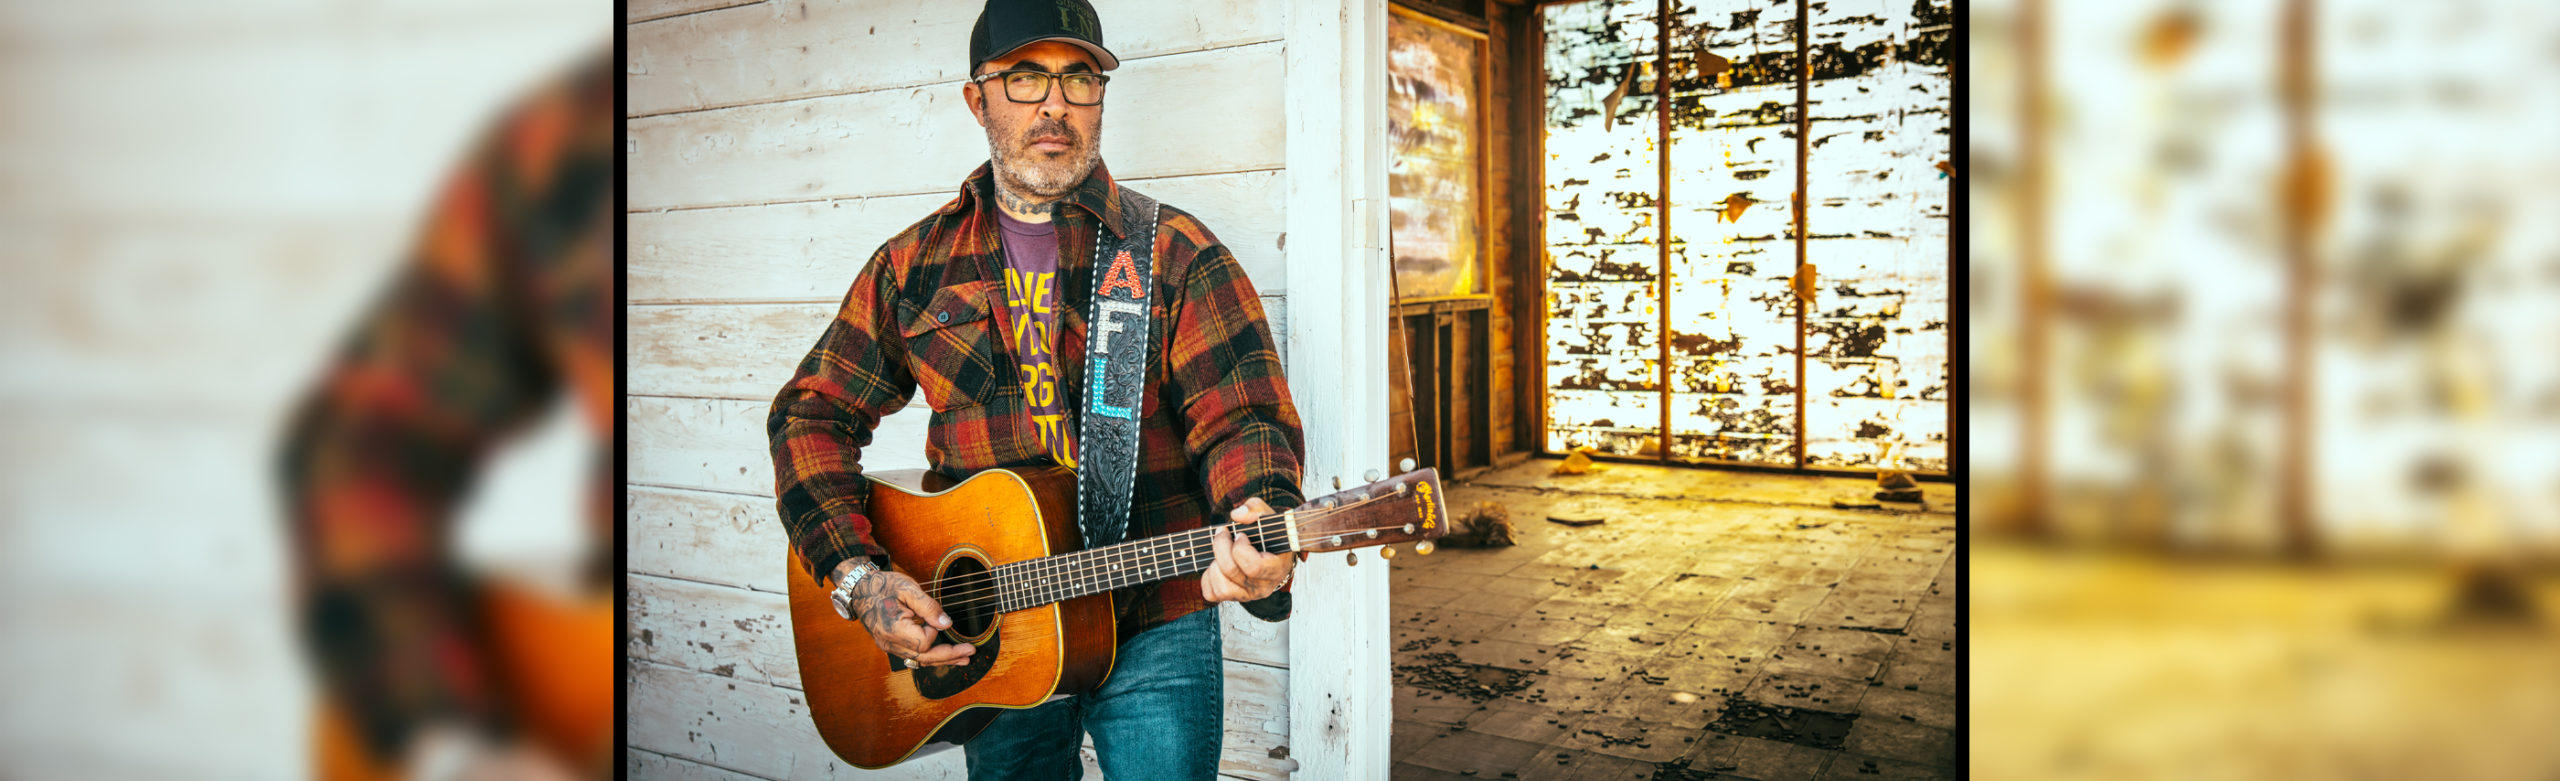 Outspoken Outlaw Country: Aaron Lewis Announces ‘The State I’m In’ Tour Stop in Missoula Image